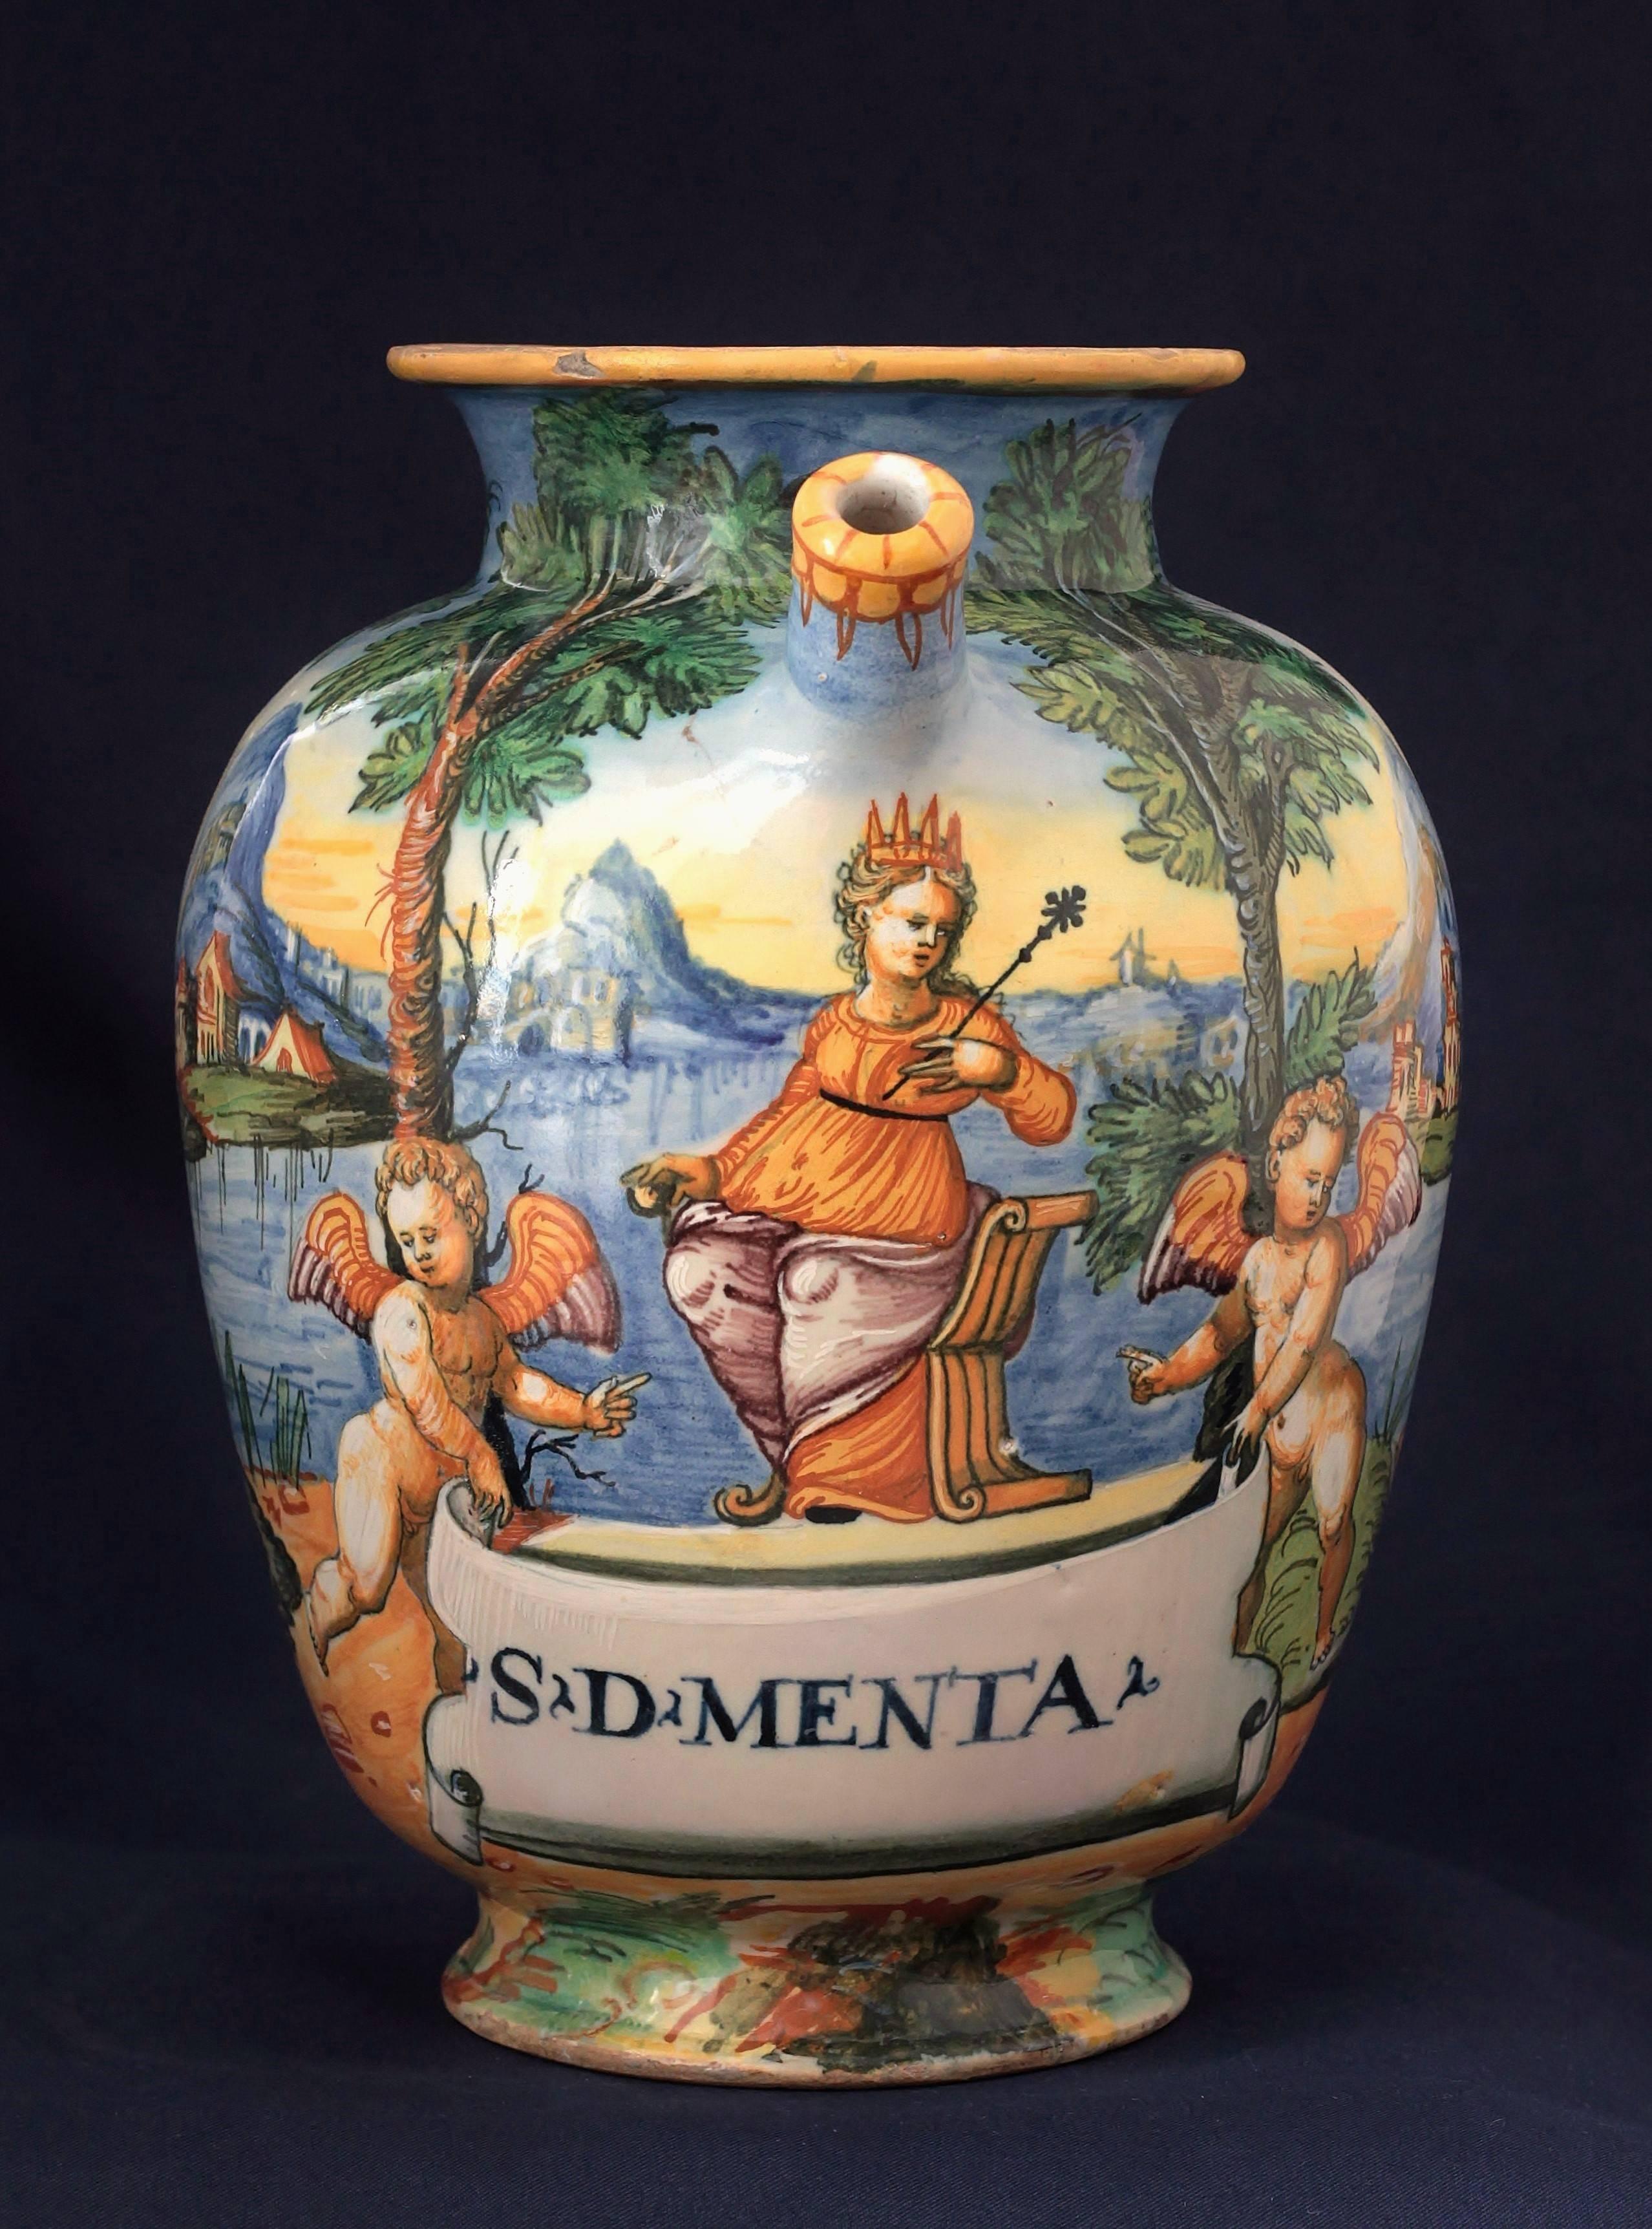 An Urbino Majolica chevrette with polychrome decoration “a istoriato” representing a queen with two cupid in a landscape. Apothecary inscription : “S.D.MENTA”.
Workshop of Orazio Fontana, circa 1565-1570, 16th century.
Measures: H 22.5 cm, D 20